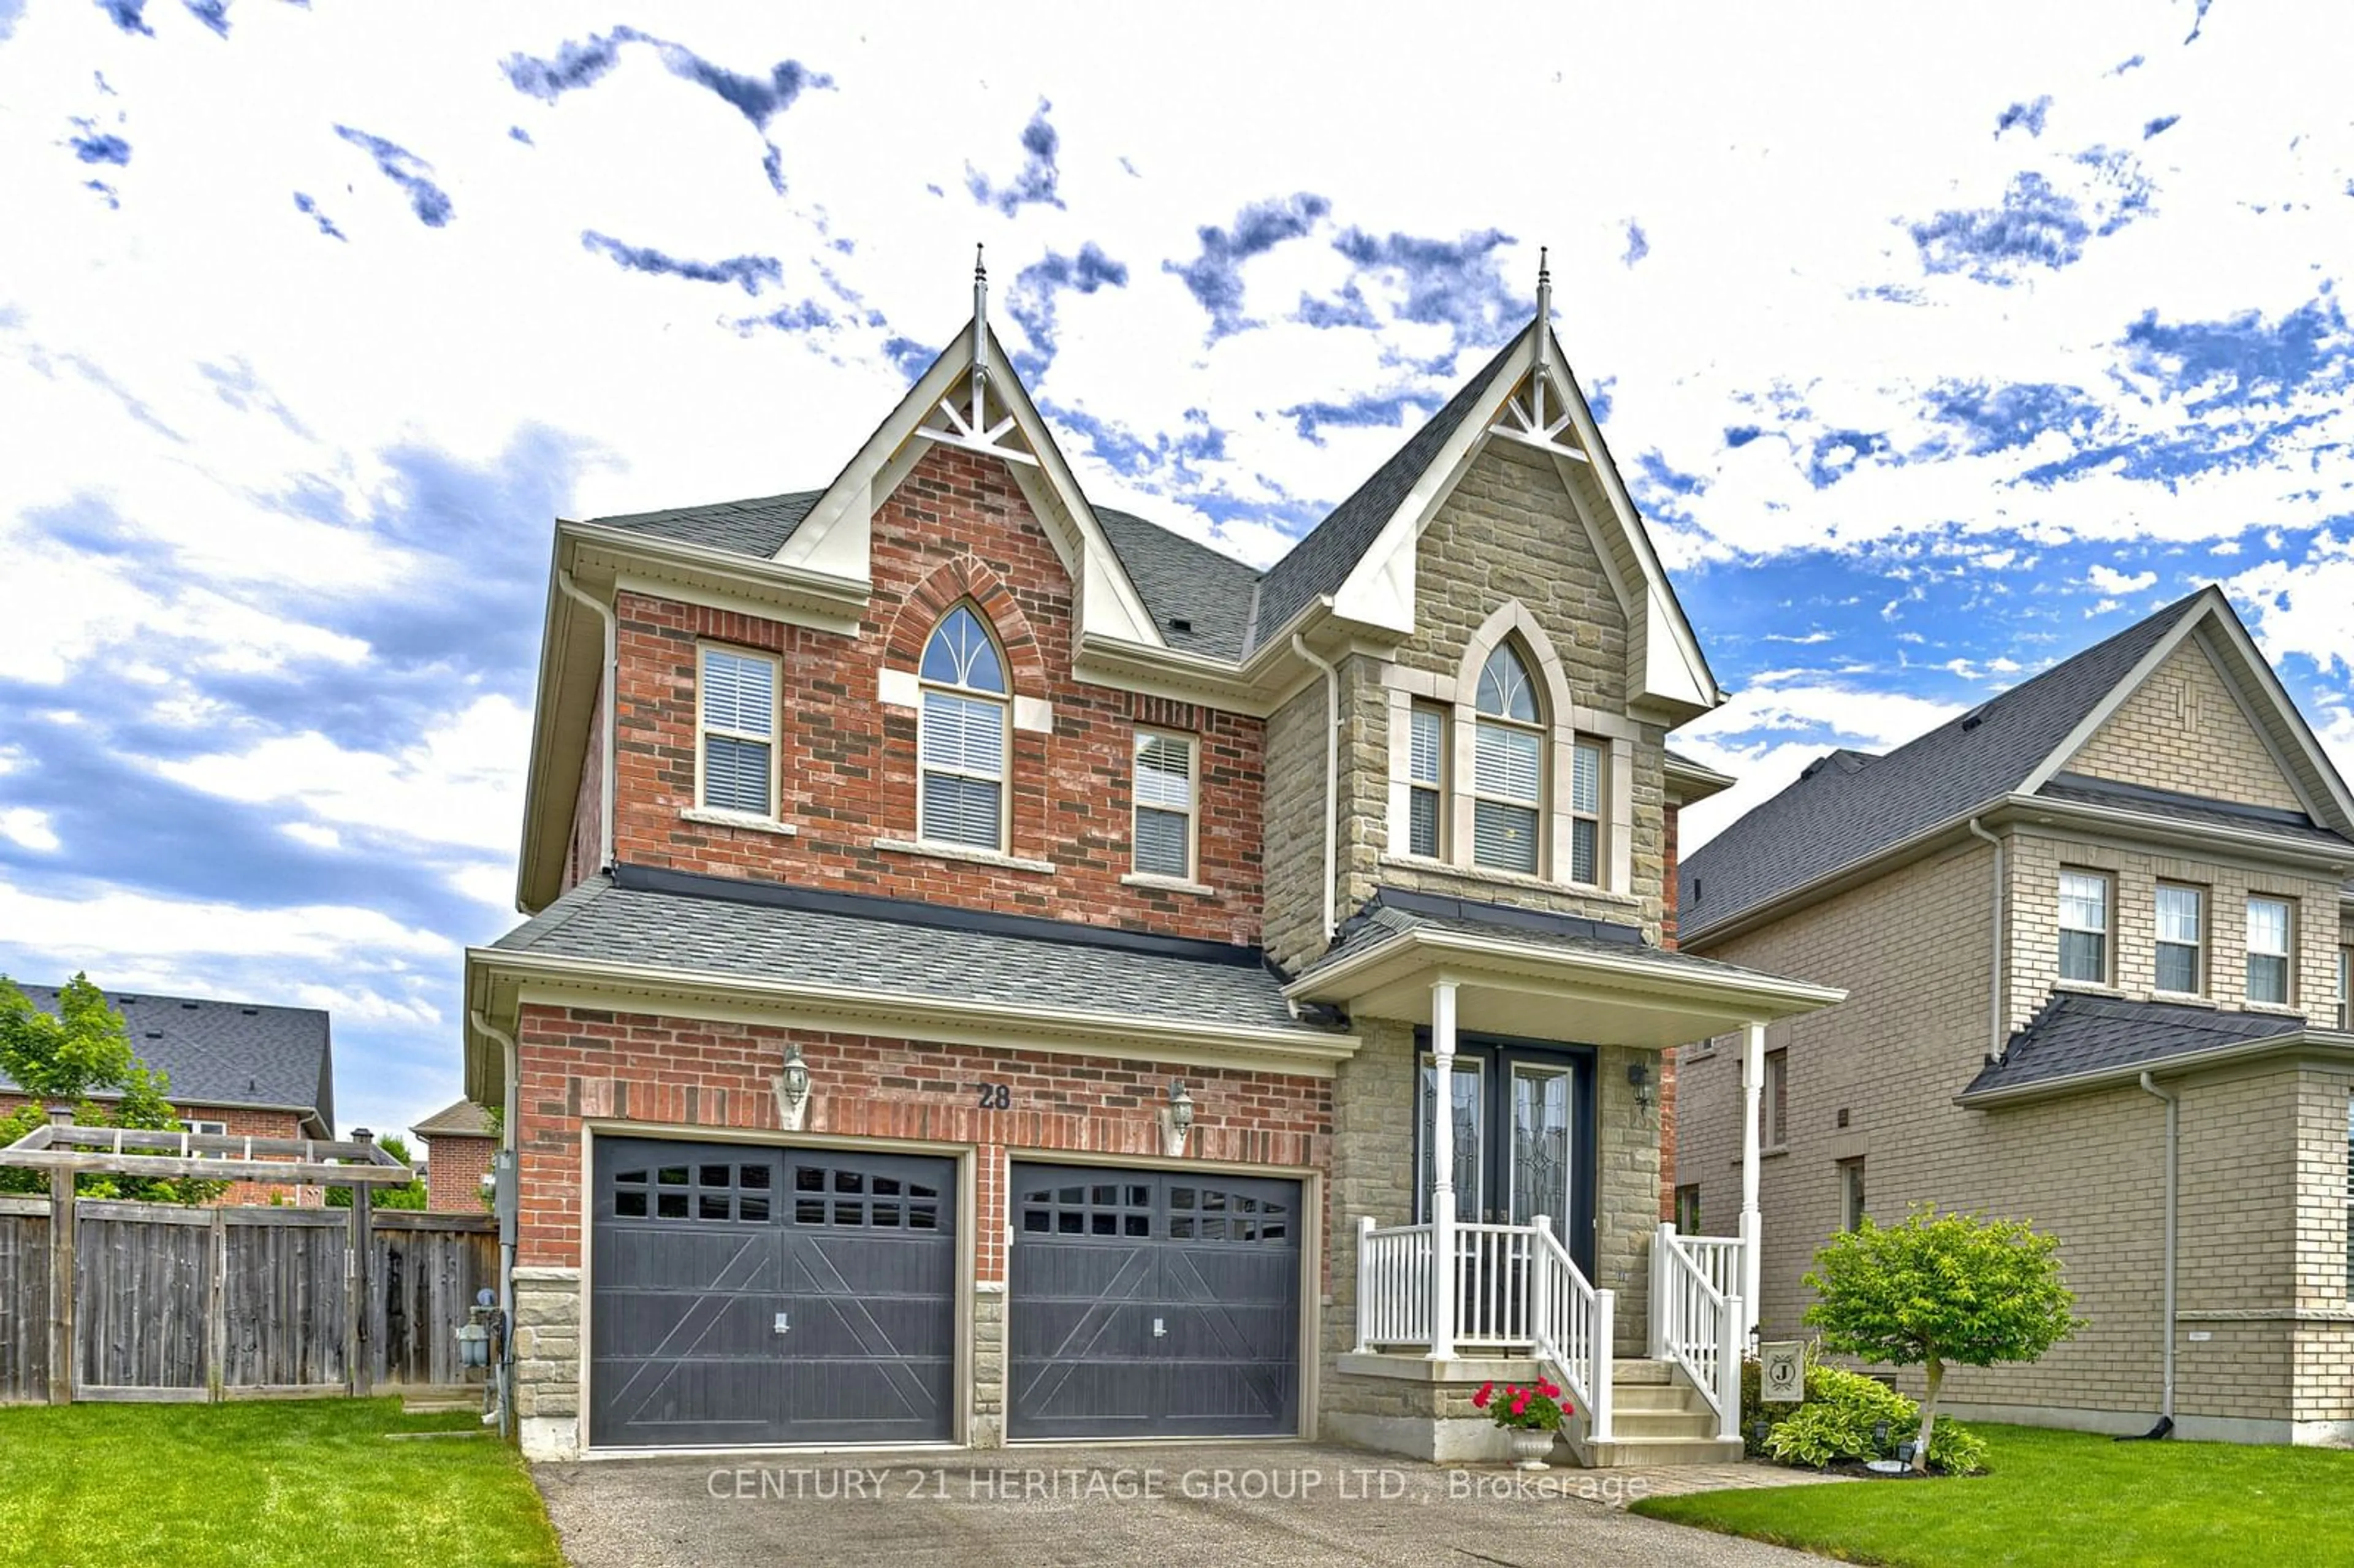 Home with brick exterior material for 28 Boyces Creek Crt, Caledon Ontario L7C 3S2